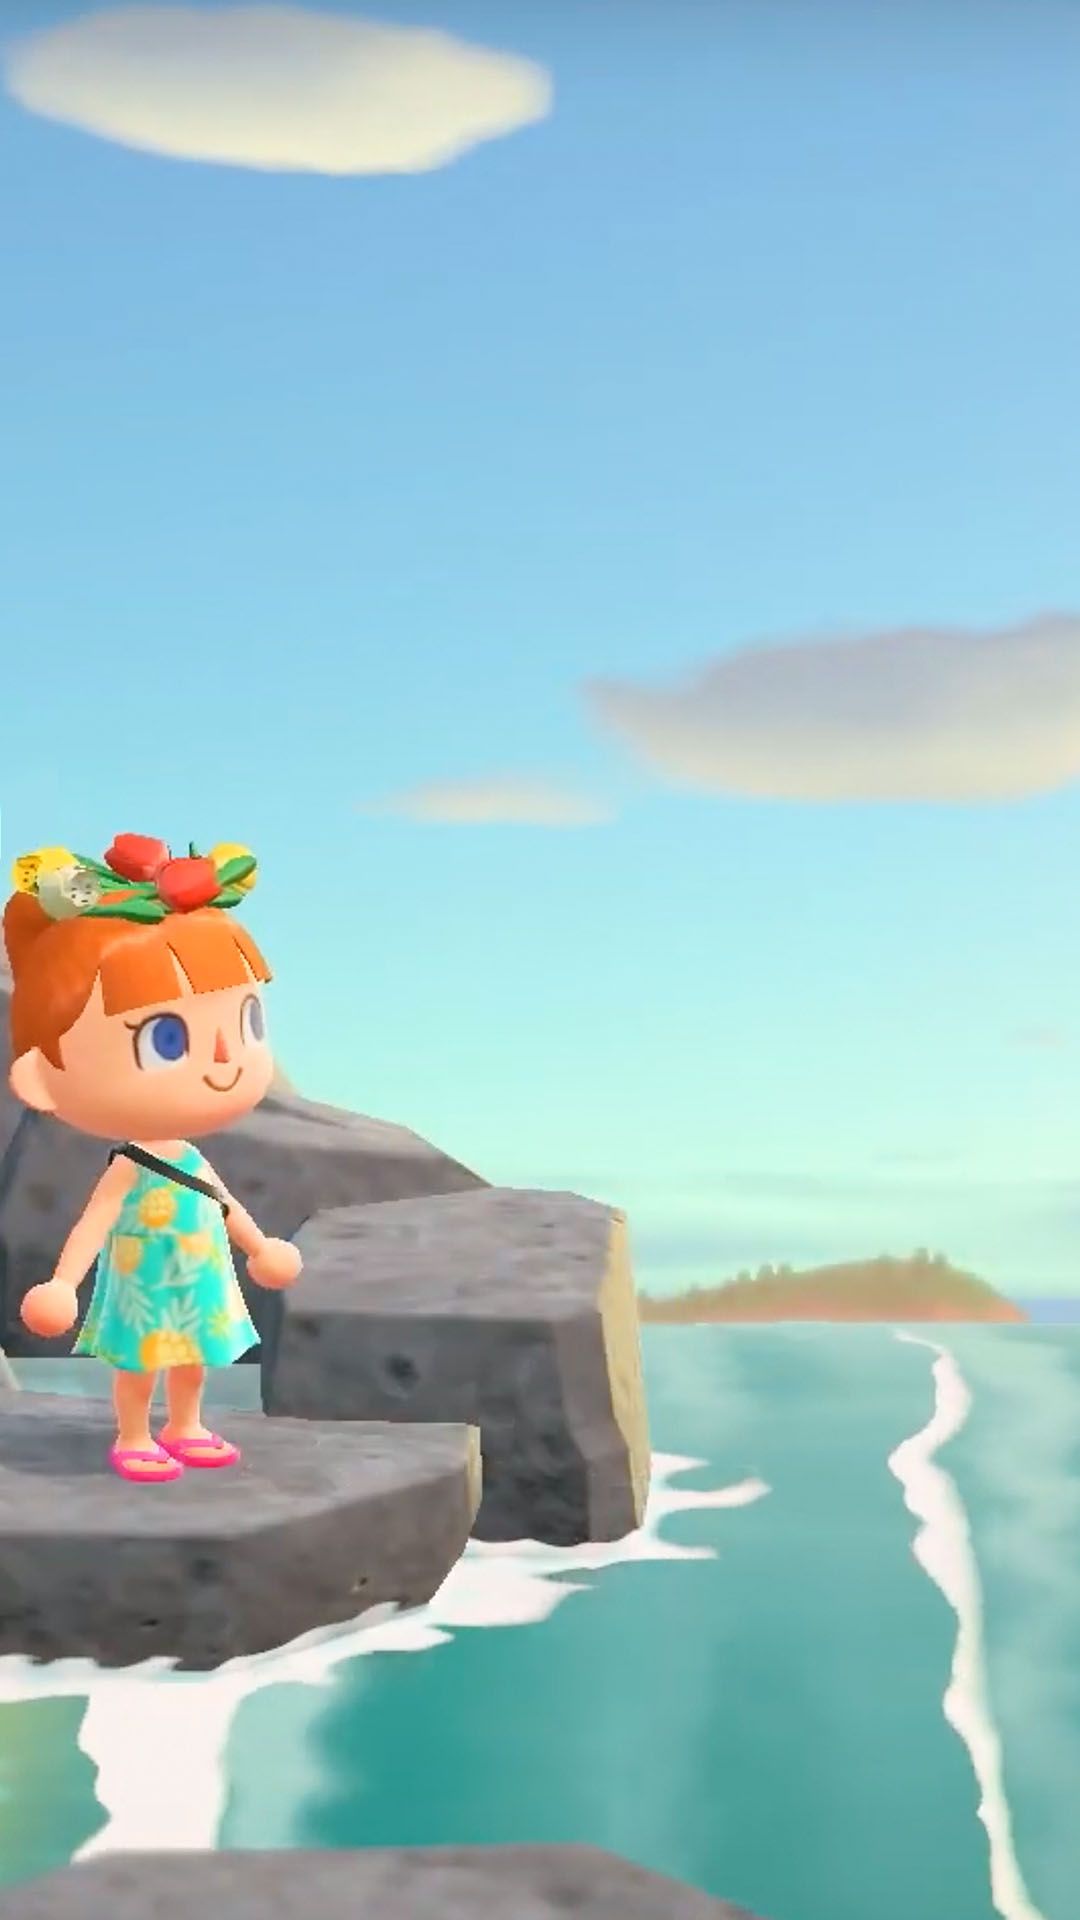 Adorable Animal Crossing New Horizons Wallpapers